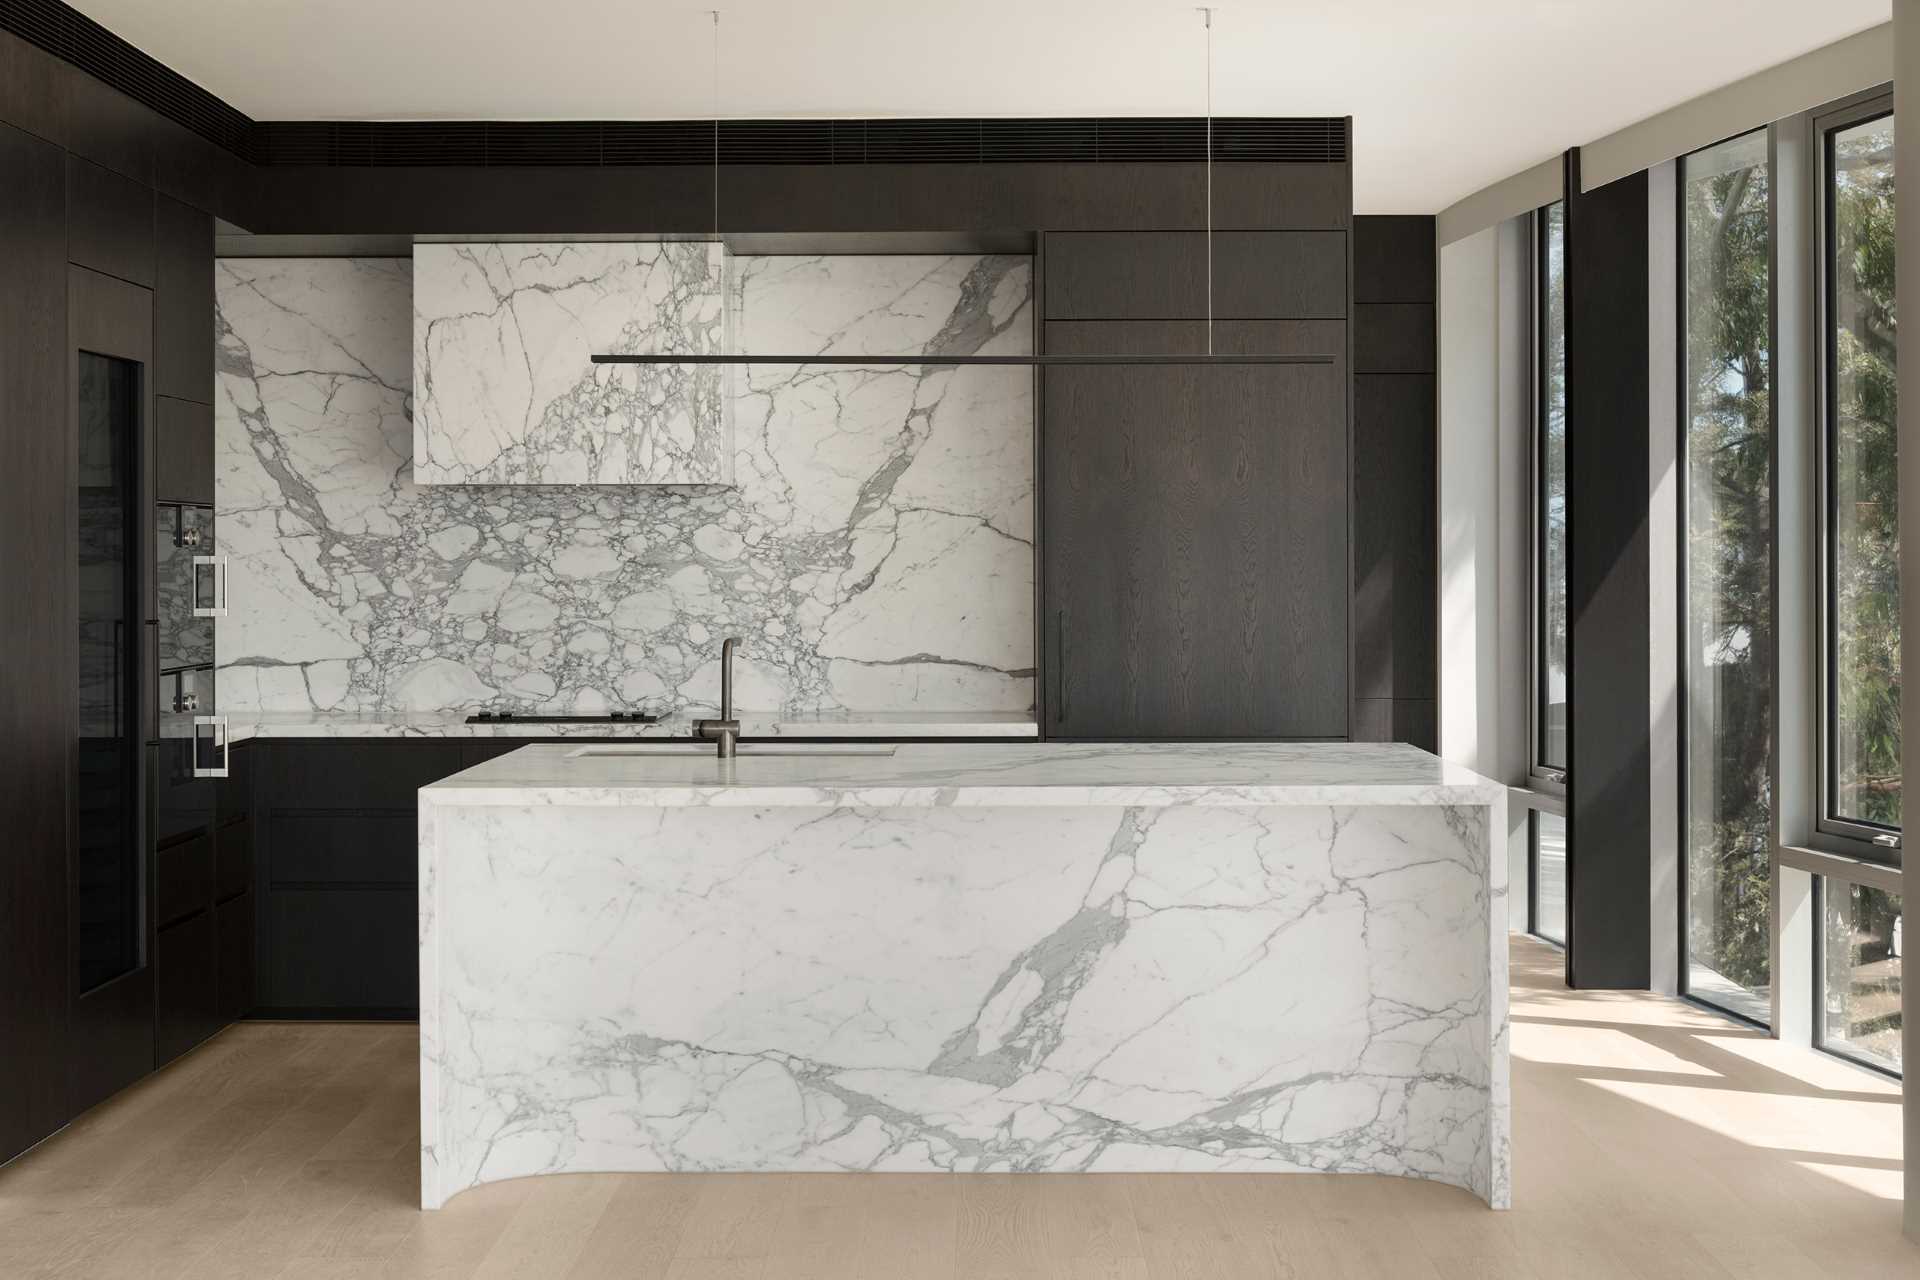 In this modern kitchen highly crafted joinery in natural timber and book-matched marble add to the overall feeling of warmth, contrast, and a refined approach to pared-down luxury.